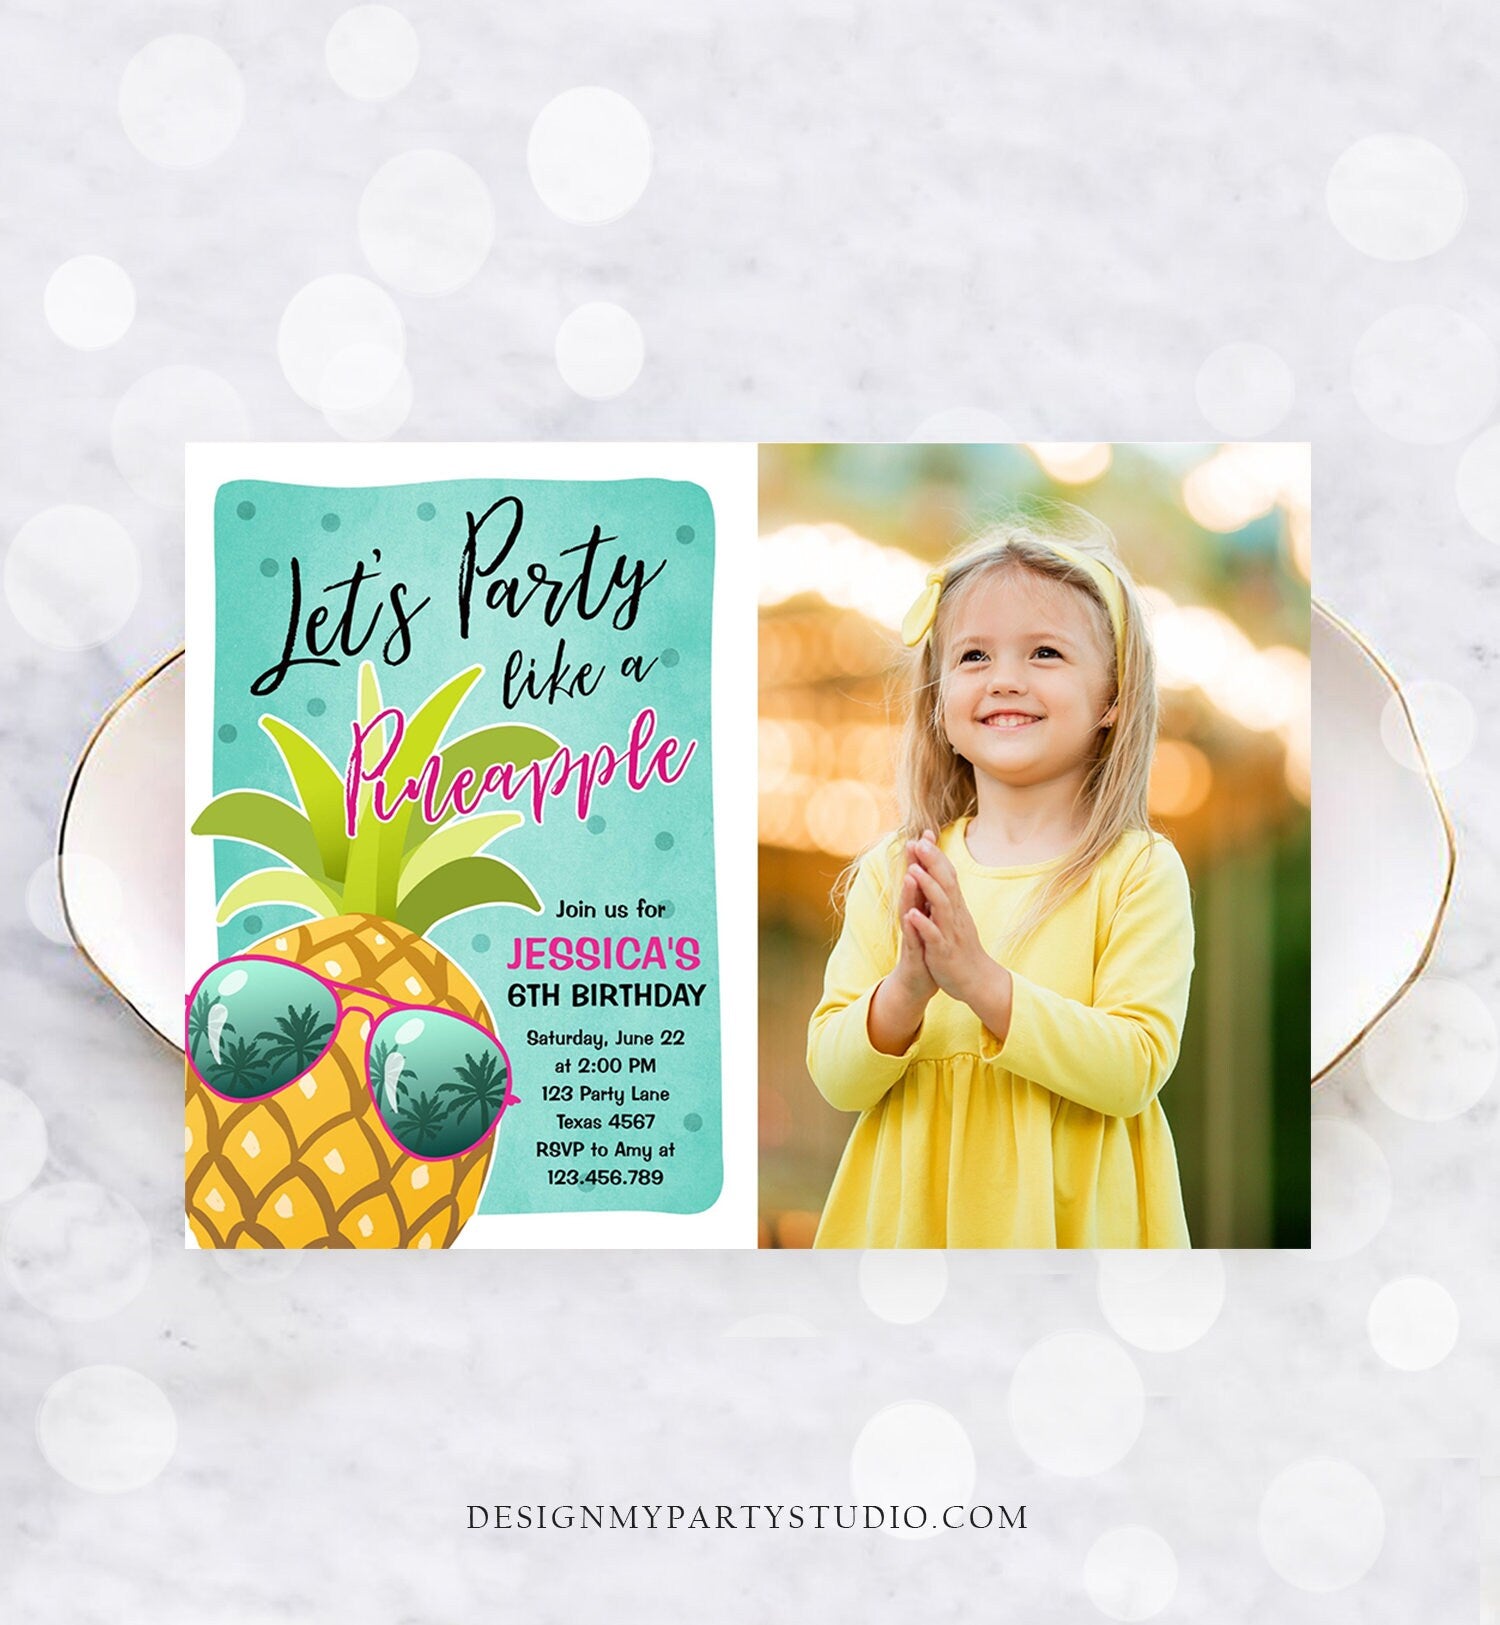 Editable Pineapple Birthday Invitation Lets Party Like a Pineapple Invite Tropical Party Aloha Girl Download Printable Template Corjl 0203